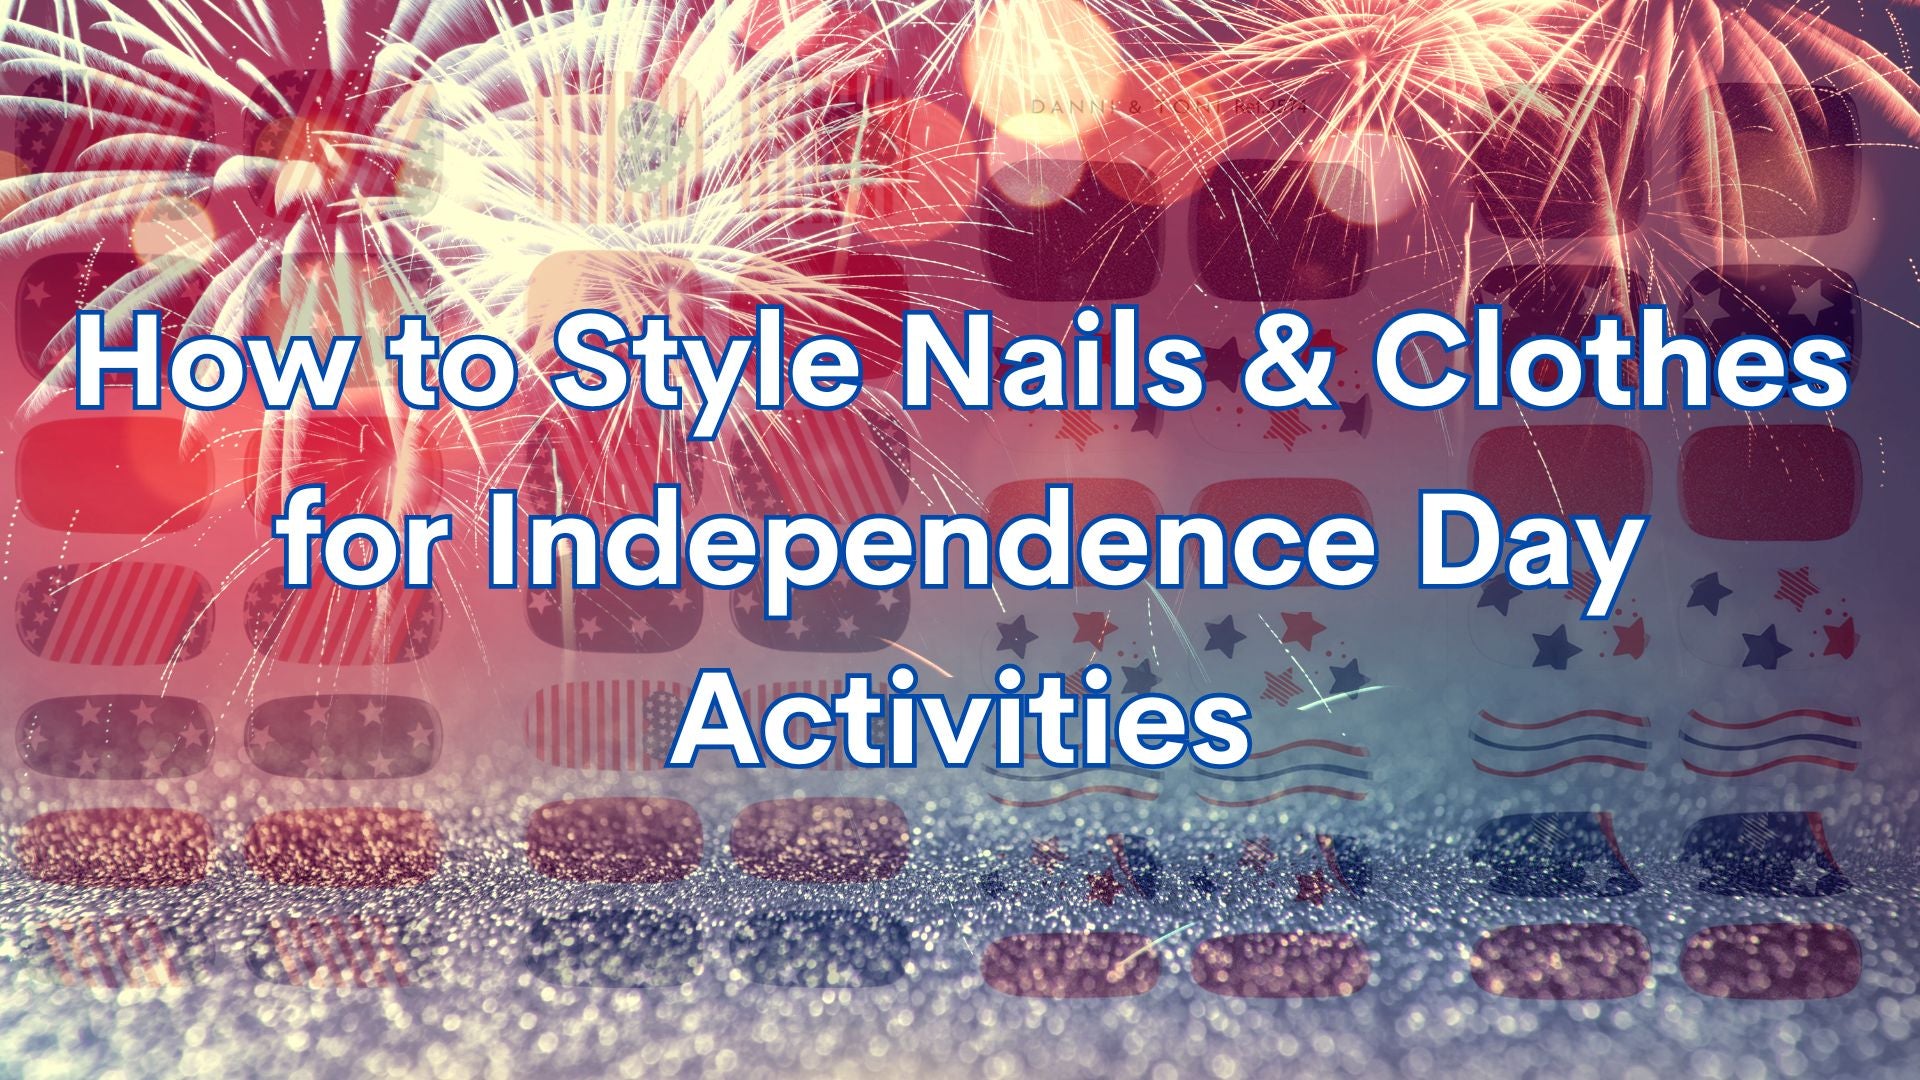 How to Style Nails & Clothes for Independence Day Activities